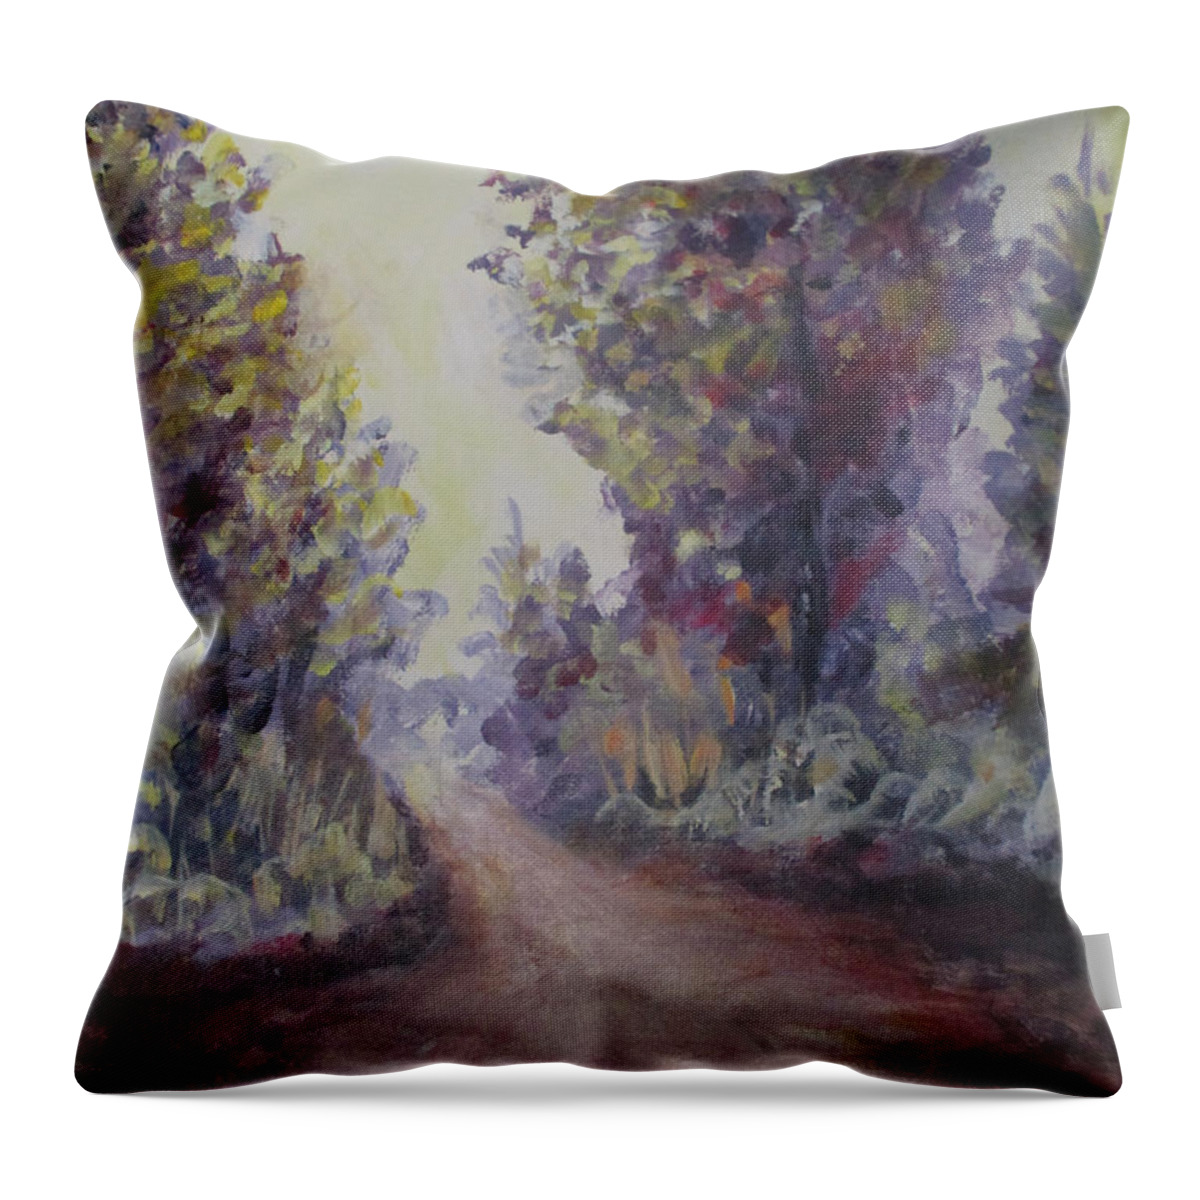 Wood Throw Pillow featuring the painting Woodlet by Jen Shearer